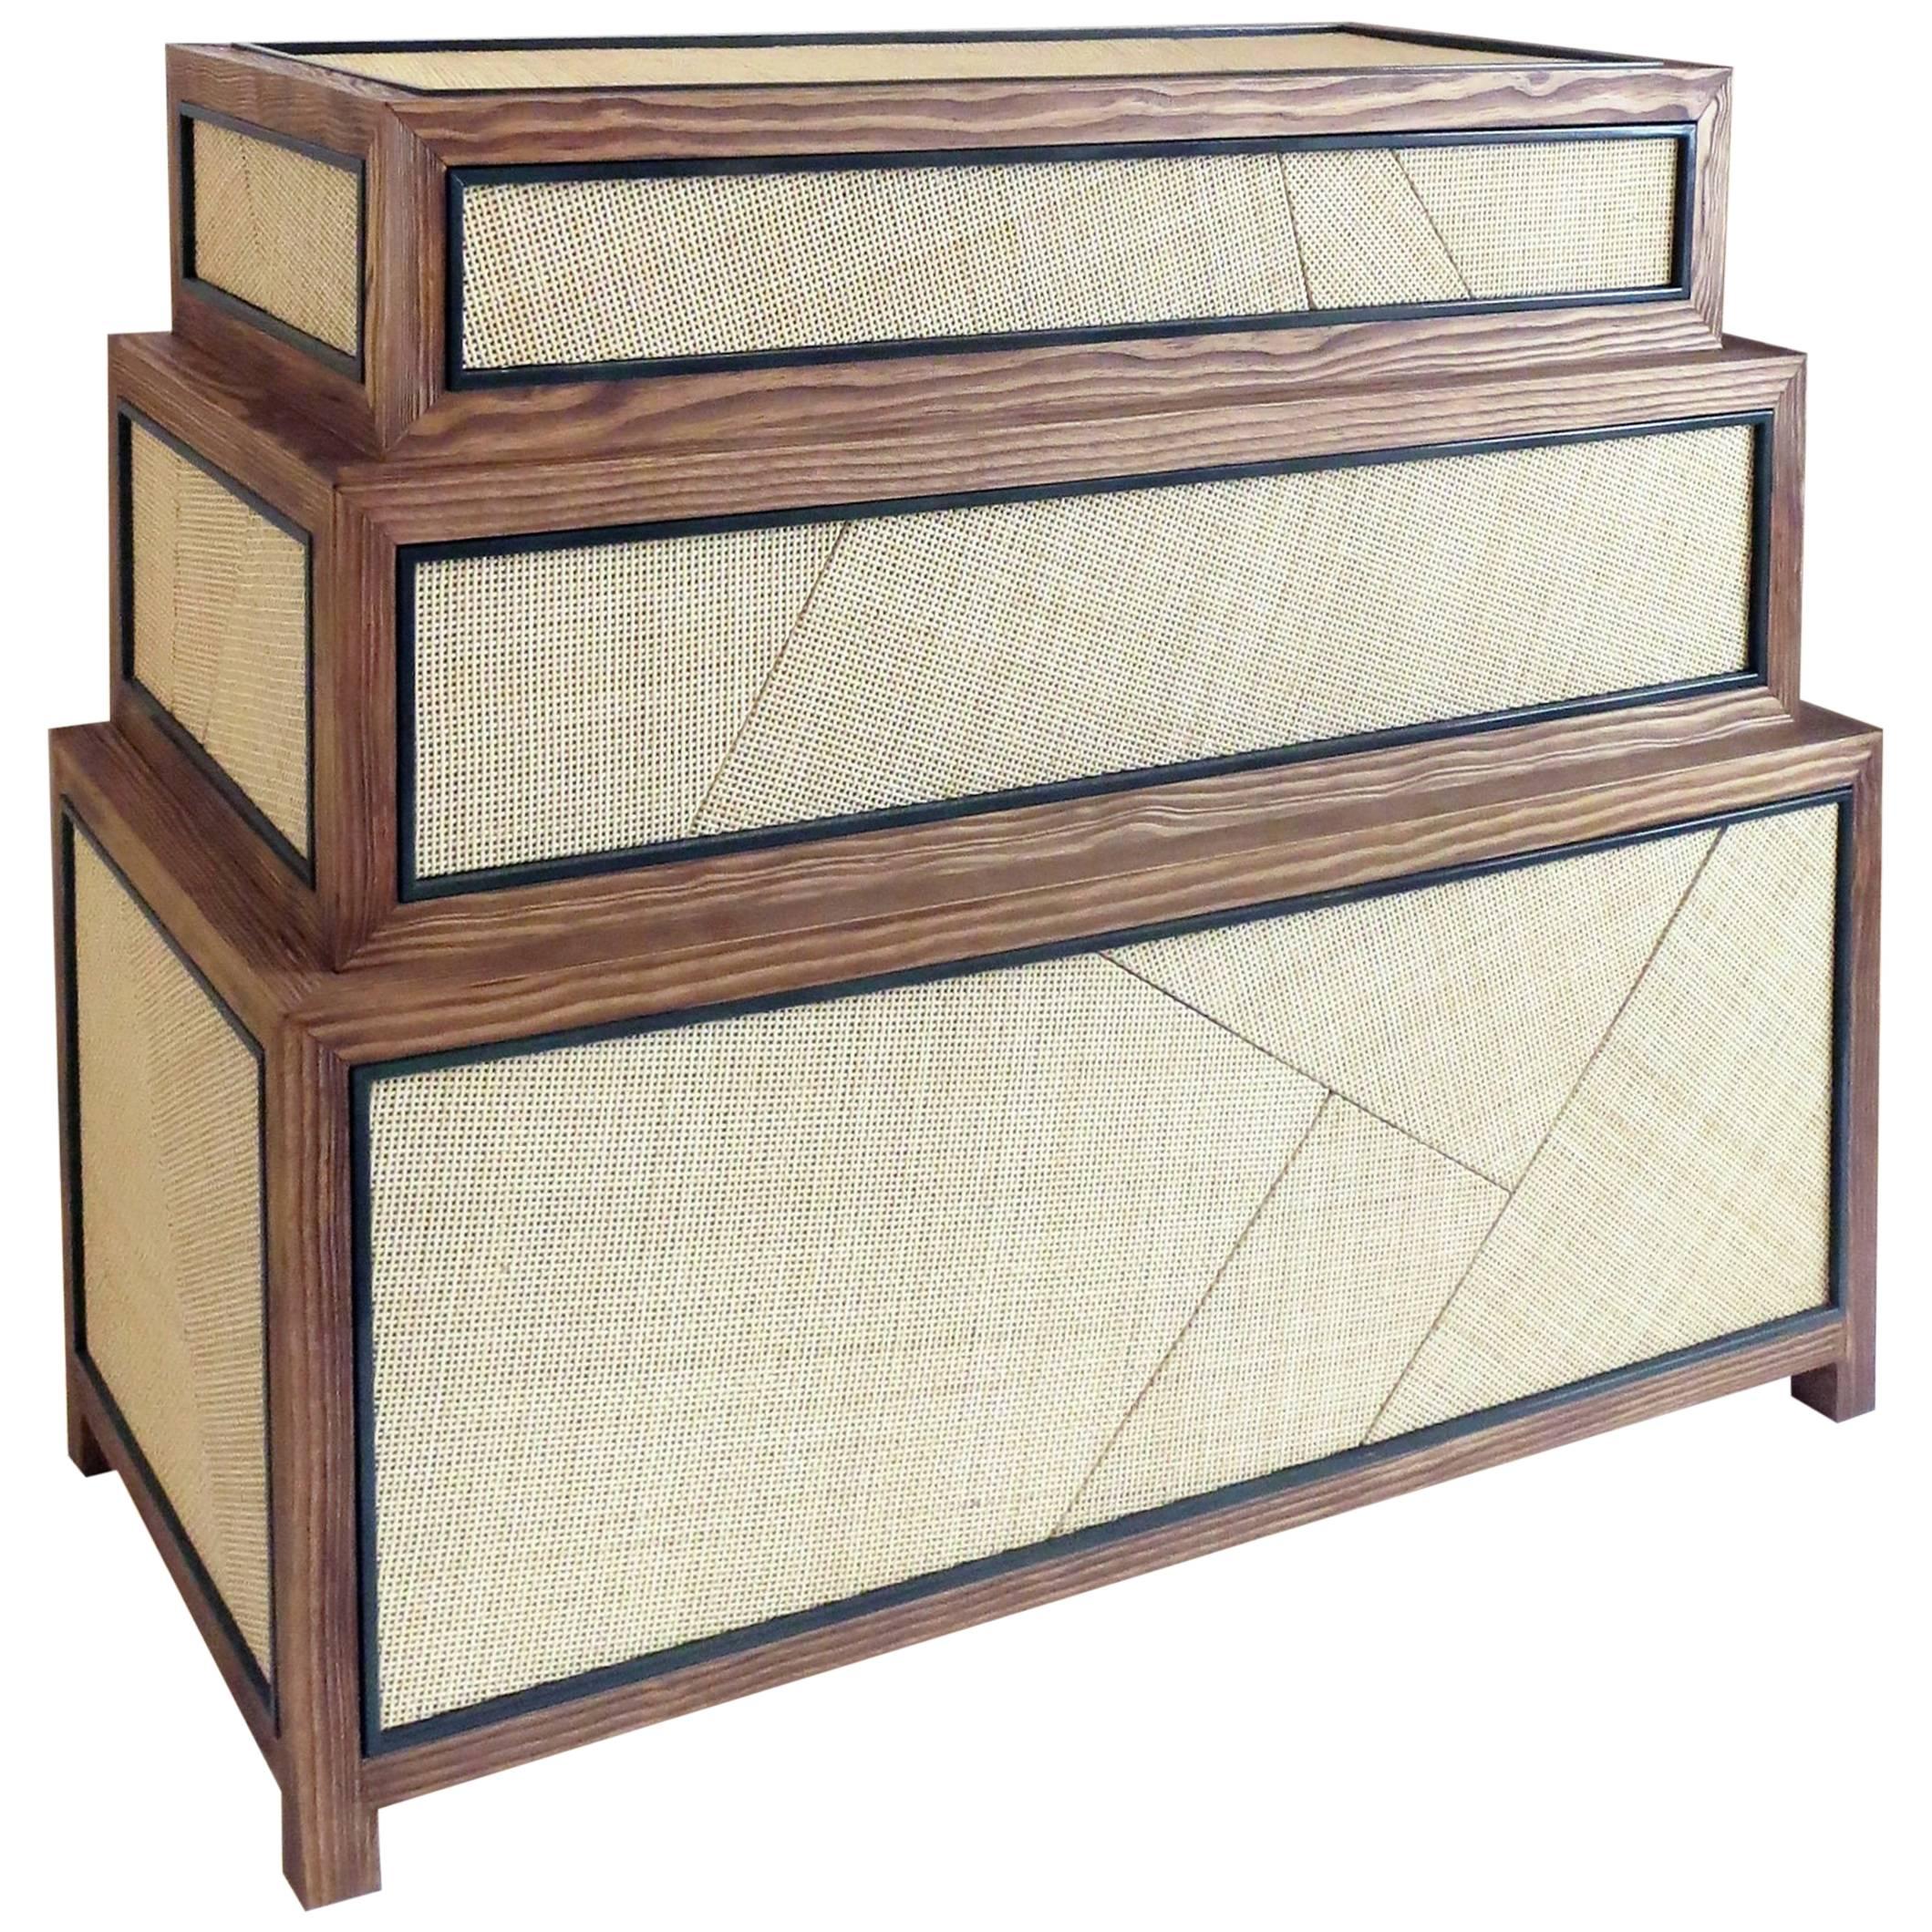 Suduca & Merillou Chest of Drawers, Woven Cane and Brushed Pine Wood For Sale